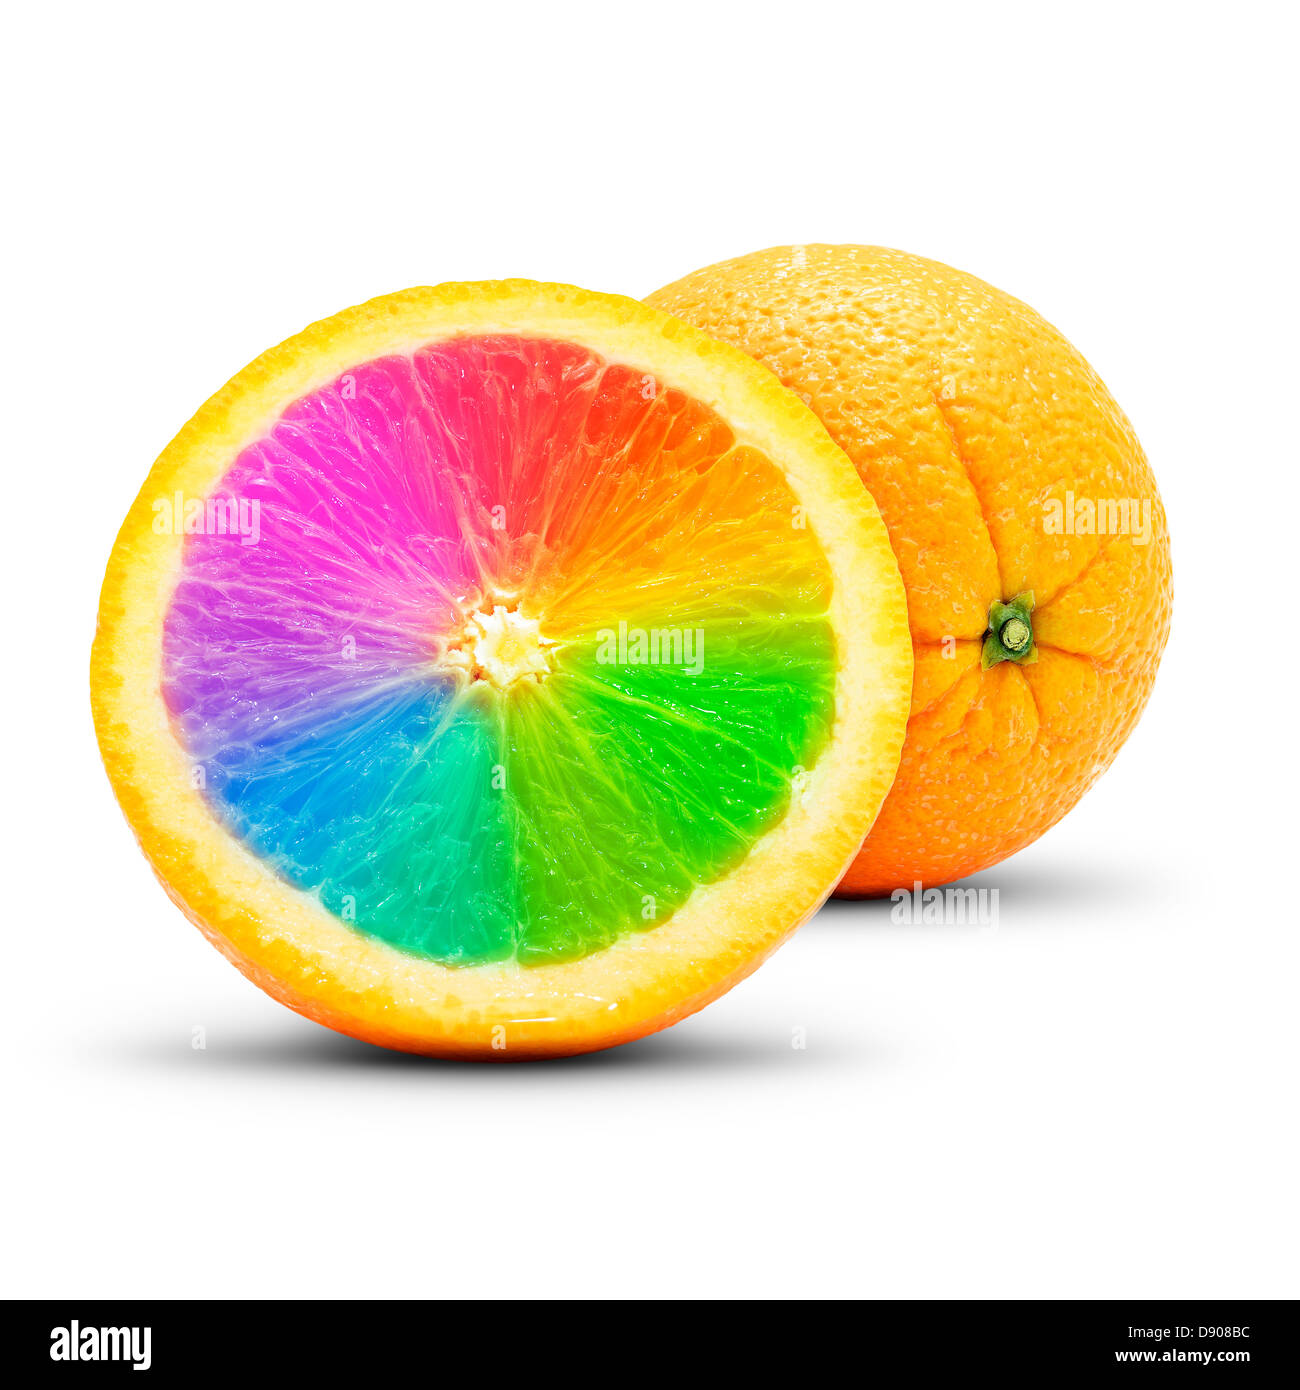 Conceptual orange composition. Isolated on white background. Stock Photo